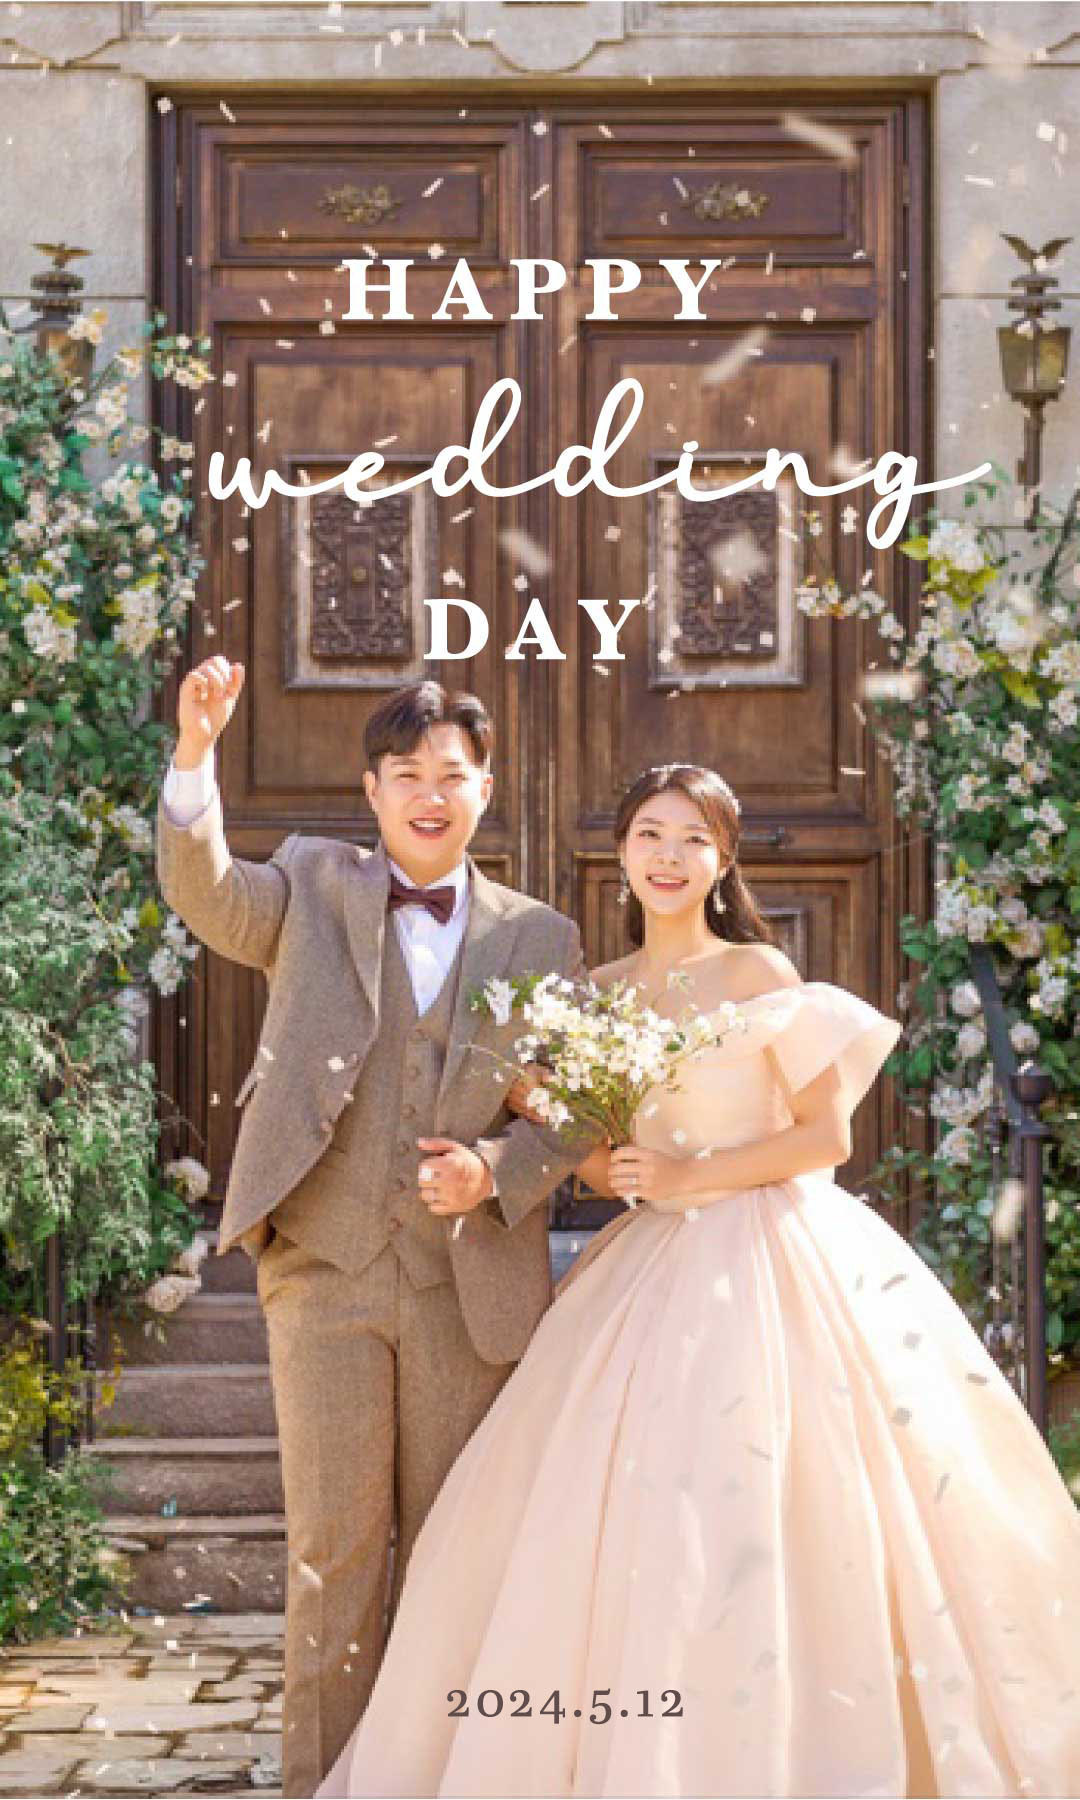 A newlywed couple joyfully gazes at the camera, exuberantly celebrating their wedding day. The words "Happy Wedding Day" are written above them, capturing the blissful moment.